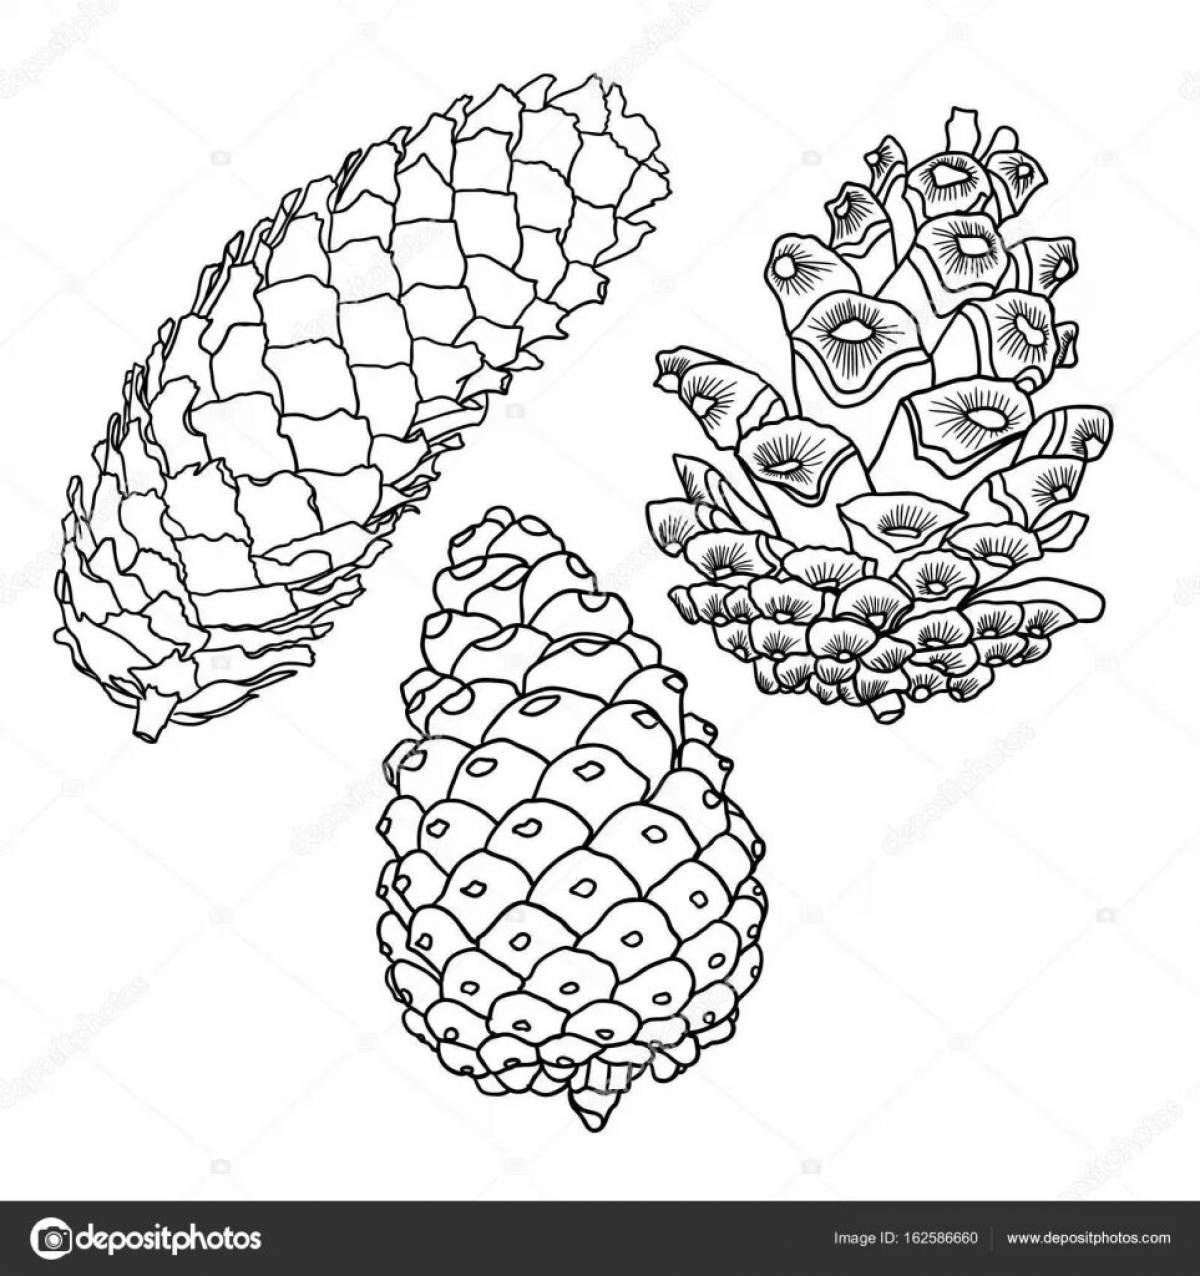 Spruce cone shiny coloring book